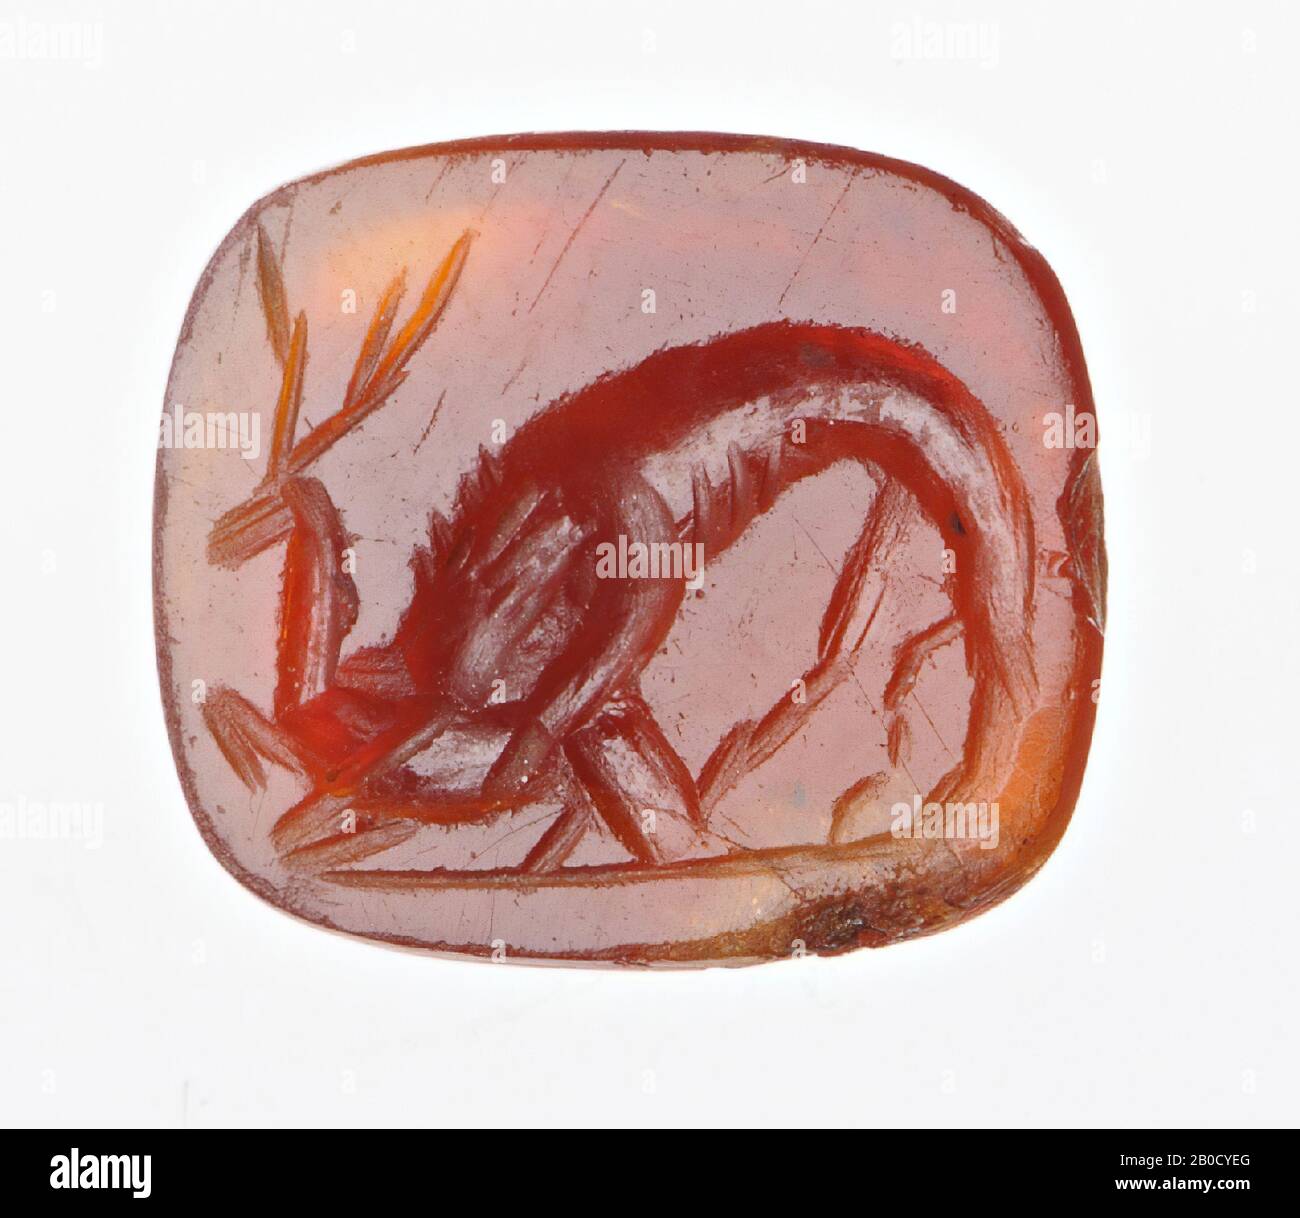 Vz: lion attacks an animal., Gem, intaglio, ringstone, carnelian, Color: dark red, Shape: square with rounded corners, Machined: edge at the back cut back with respect to front, Method: modeling with rounded wheel grooves., 10 x 8 mm, D. 3 mm, 2nd - 3rd century AD. 100-300 AD Stock Photo